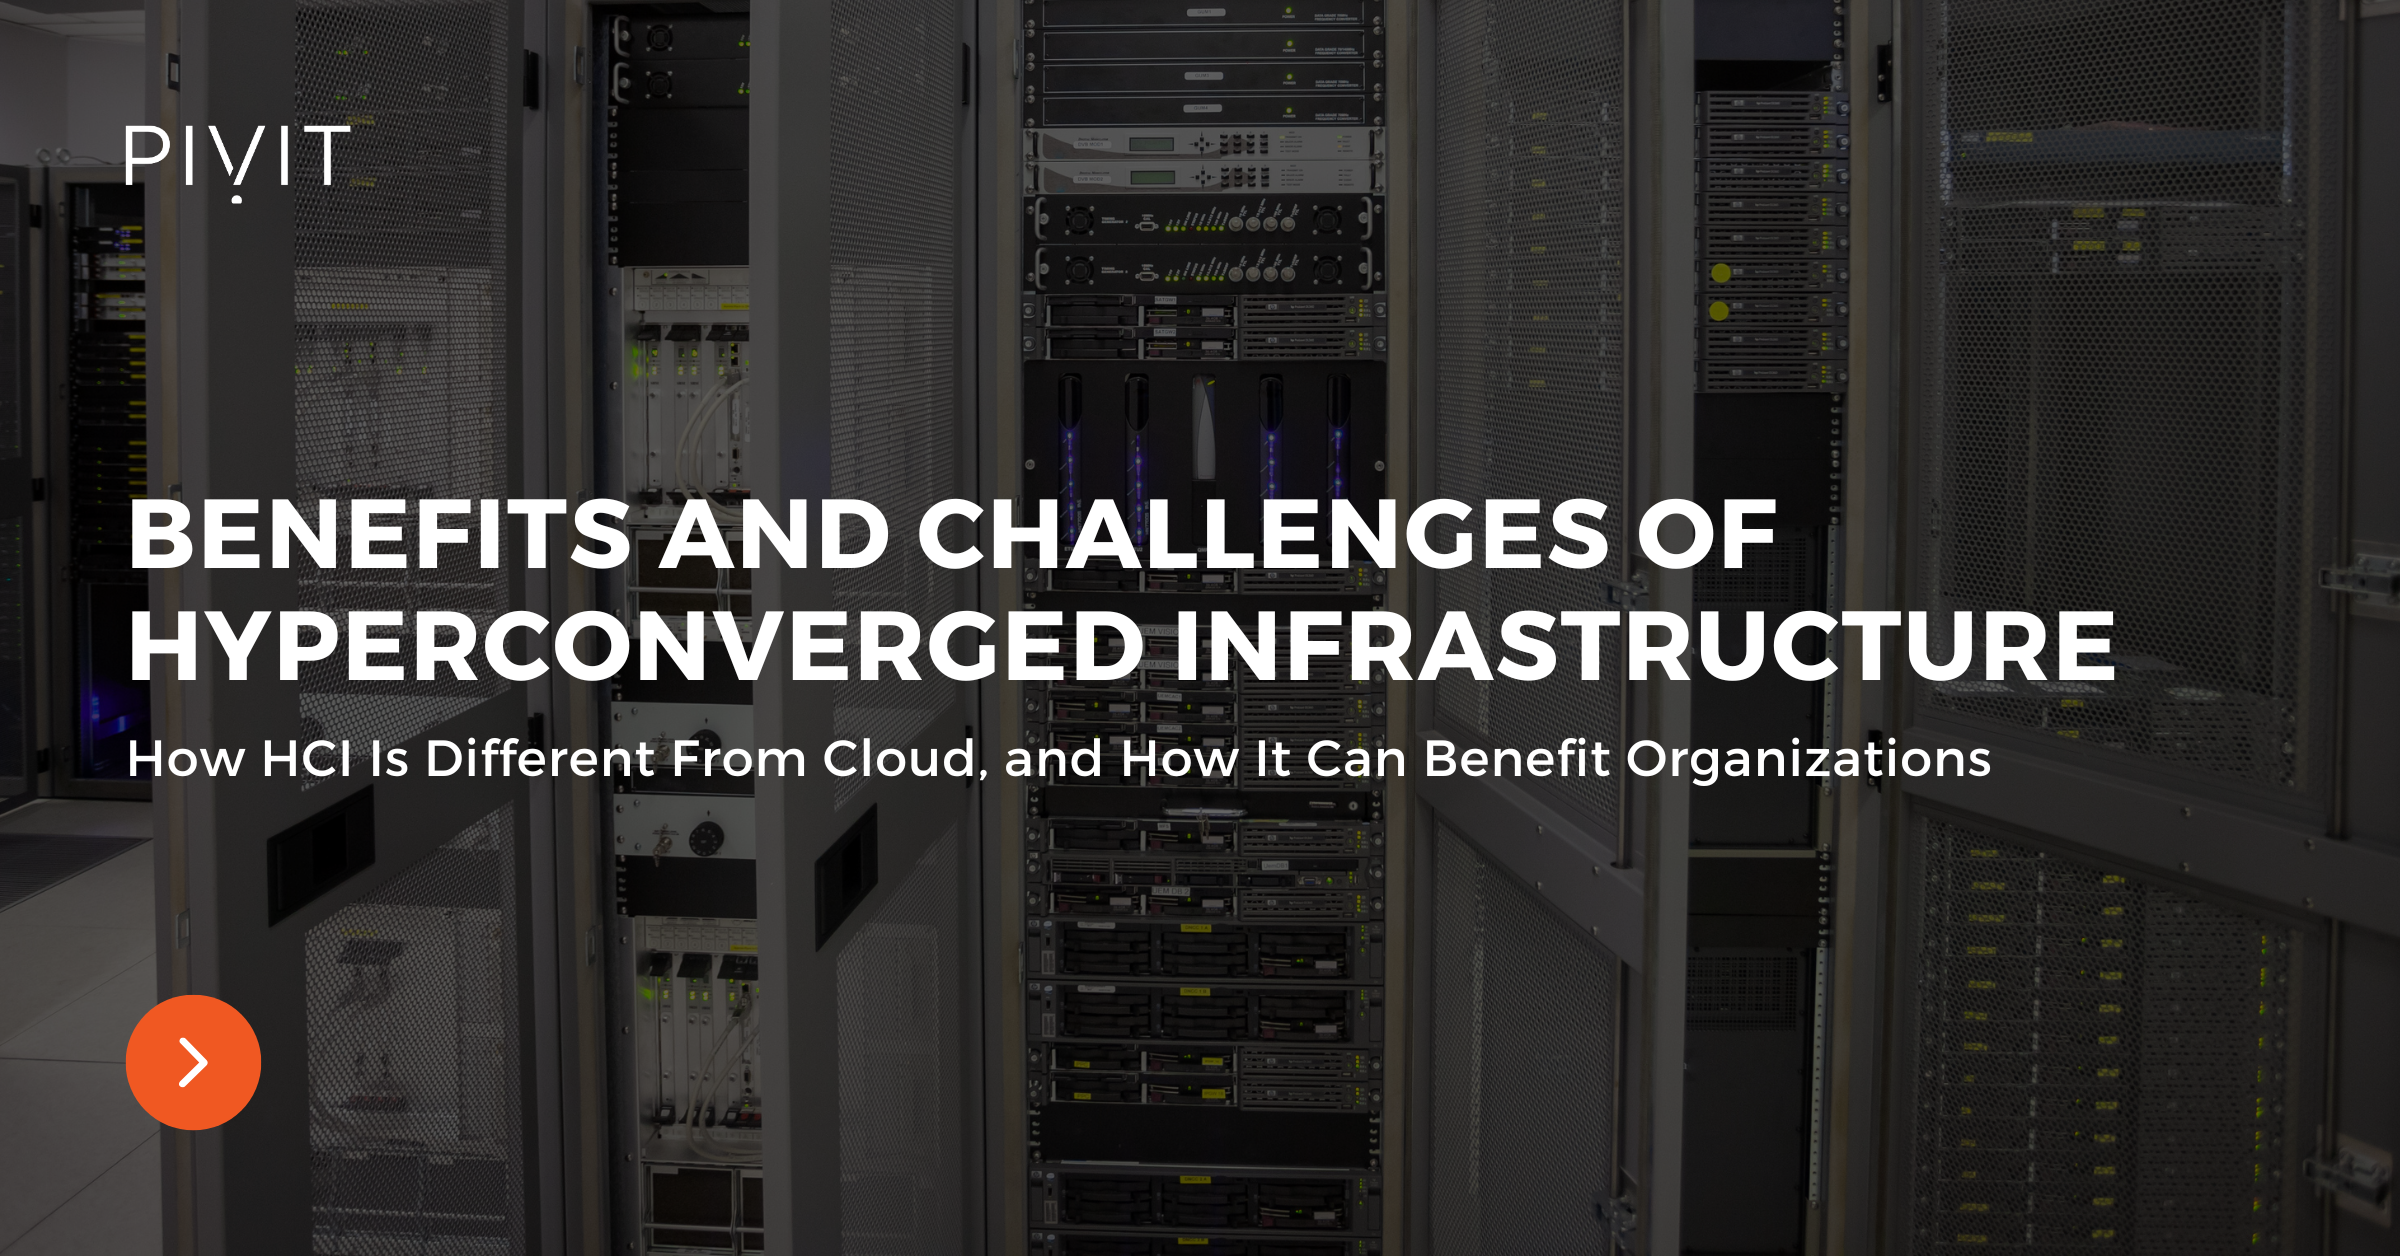 Benefits and Challenges of a Hyper-converged Infrastructure